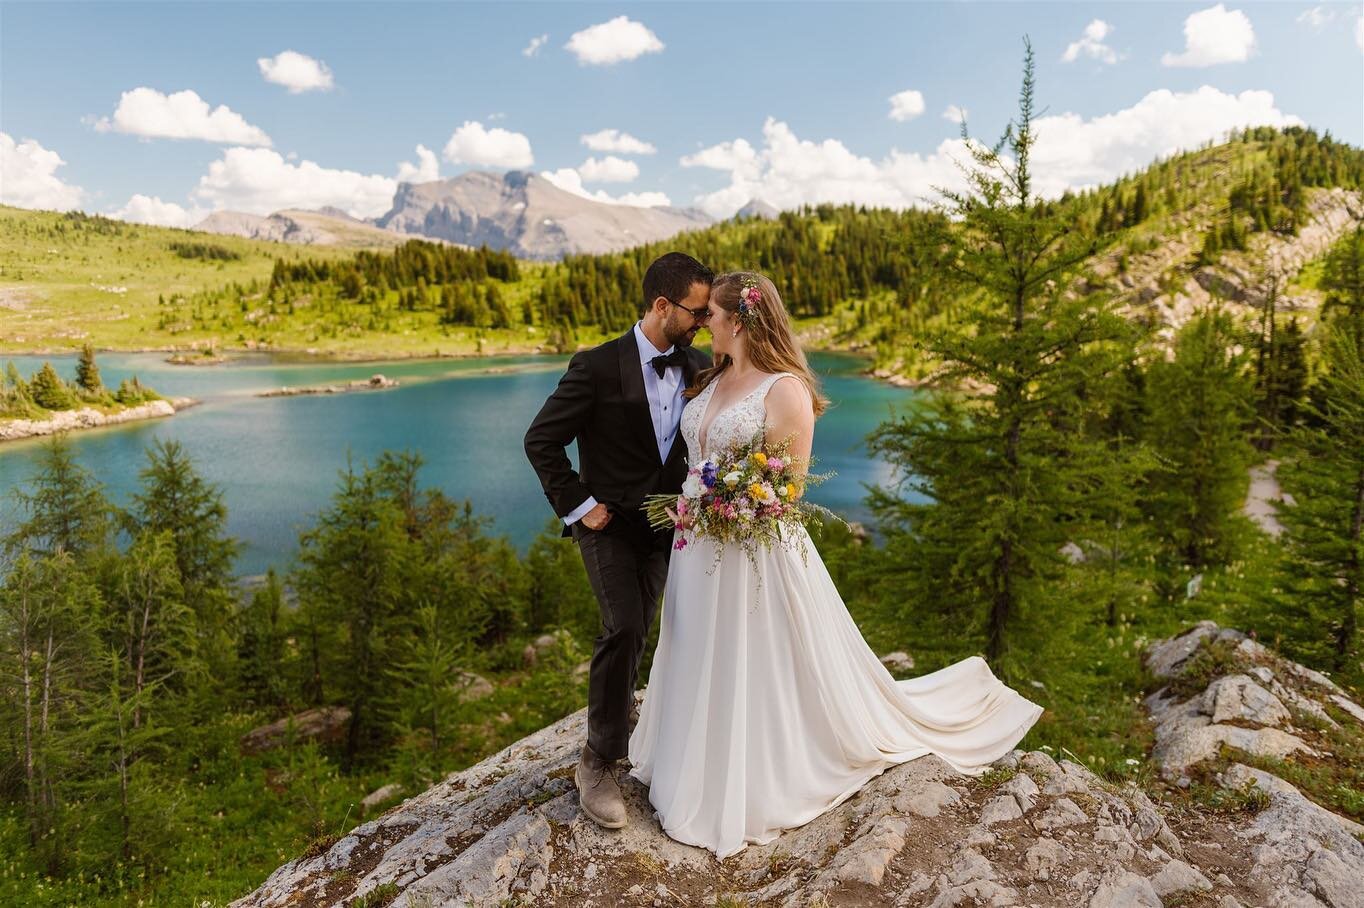 Robyn and Chris eloped on a hot summer day in the Canadian Rockies. They started their day with a beautiful ceremony by the lake, with their closest friends and family present. In the afternoon we went for a hike and were surrounded by the most incre